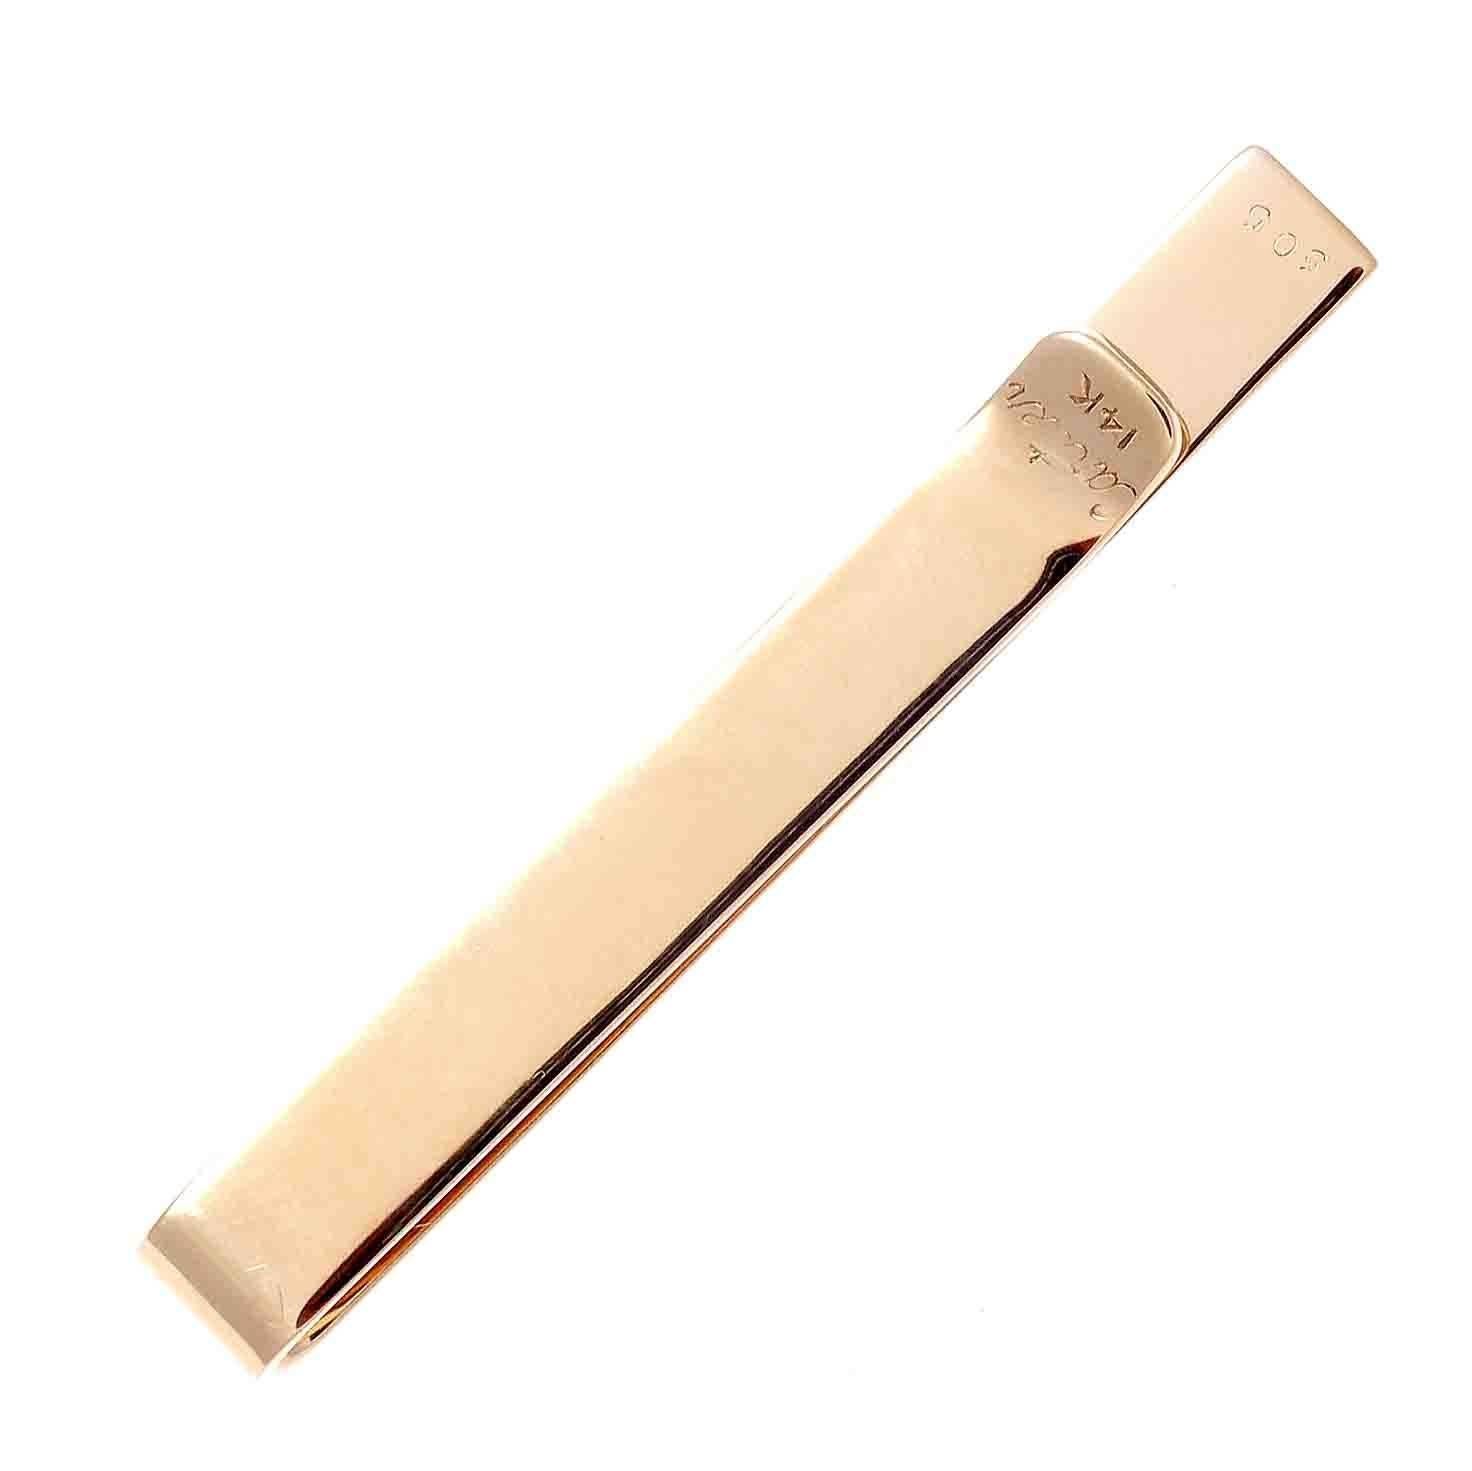 Expert craftsmanship with meticulous design even in their smallest of creations. Hand crafted in 14k gold with diagonal ridges cascading down the clip. Signed Cartier.